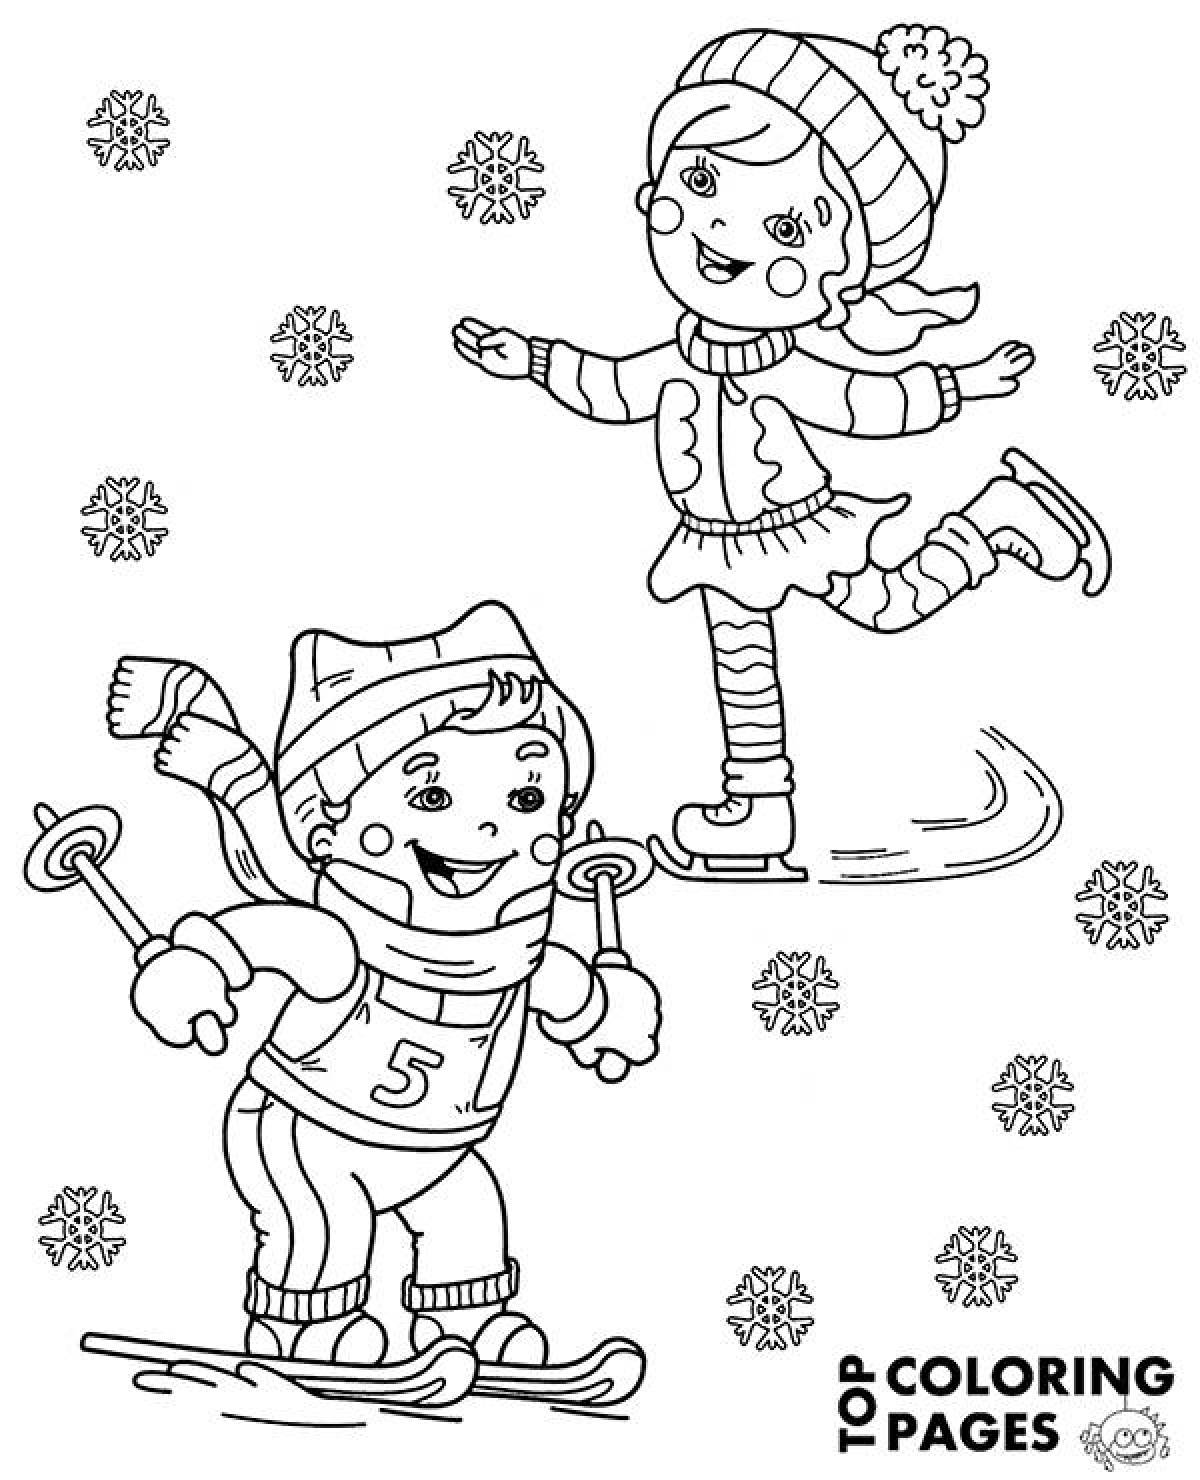 Showy coloring for children 3-4 years old winter sports